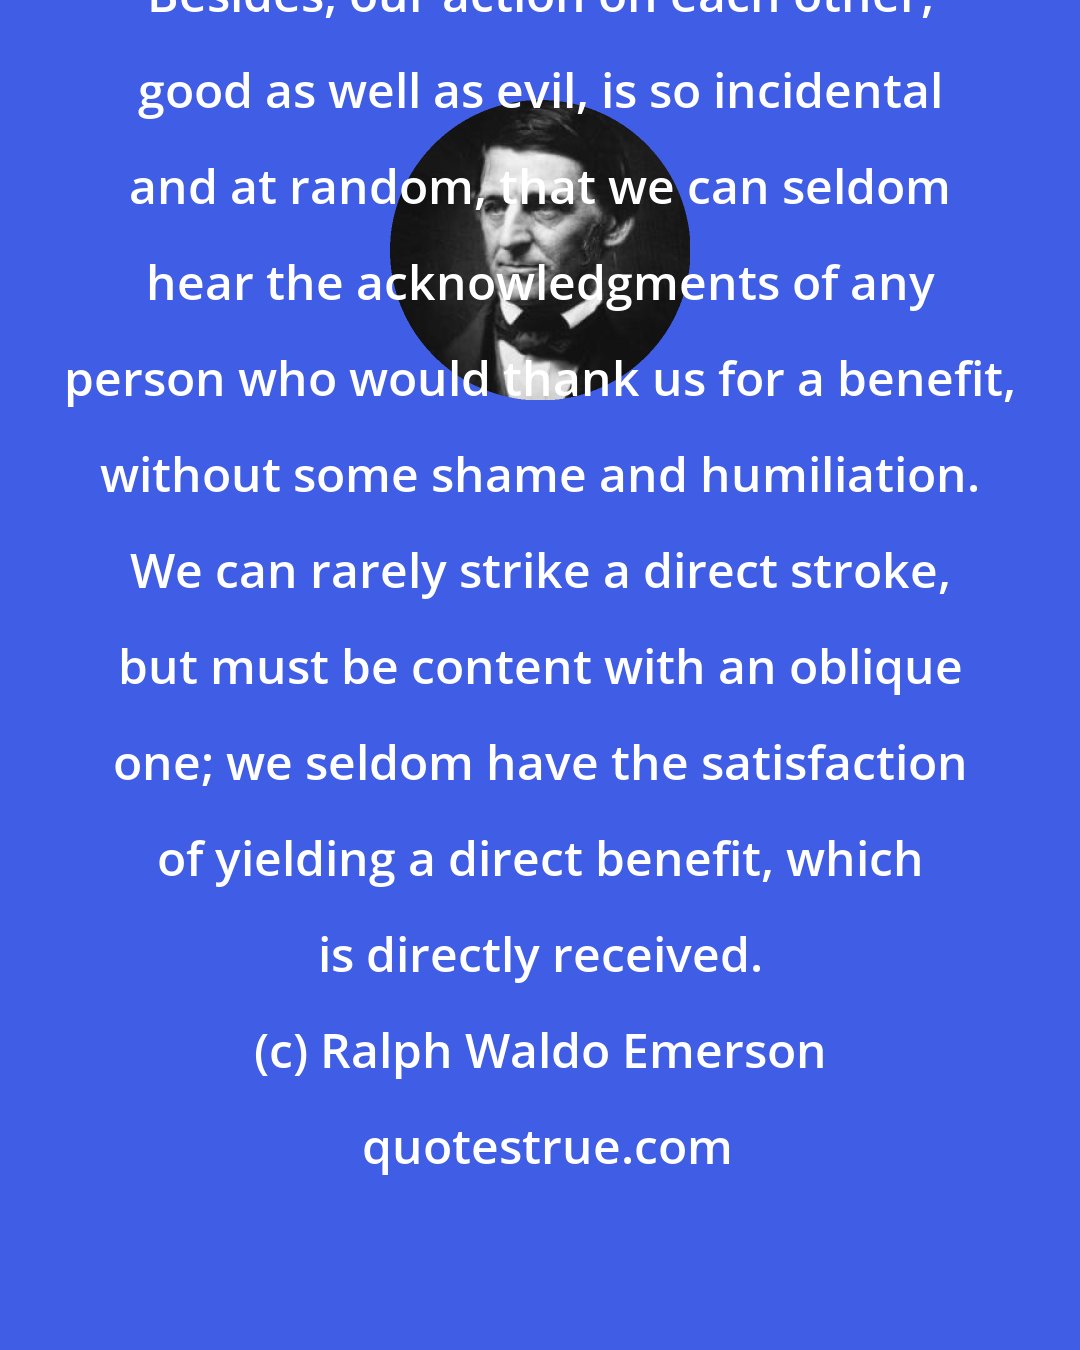 Ralph Waldo Emerson: Besides, our action on each other, good as well as evil, is so incidental and at random, that we can seldom hear the acknowledgments of any person who would thank us for a benefit, without some shame and humiliation. We can rarely strike a direct stroke, but must be content with an oblique one; we seldom have the satisfaction of yielding a direct benefit, which is directly received.